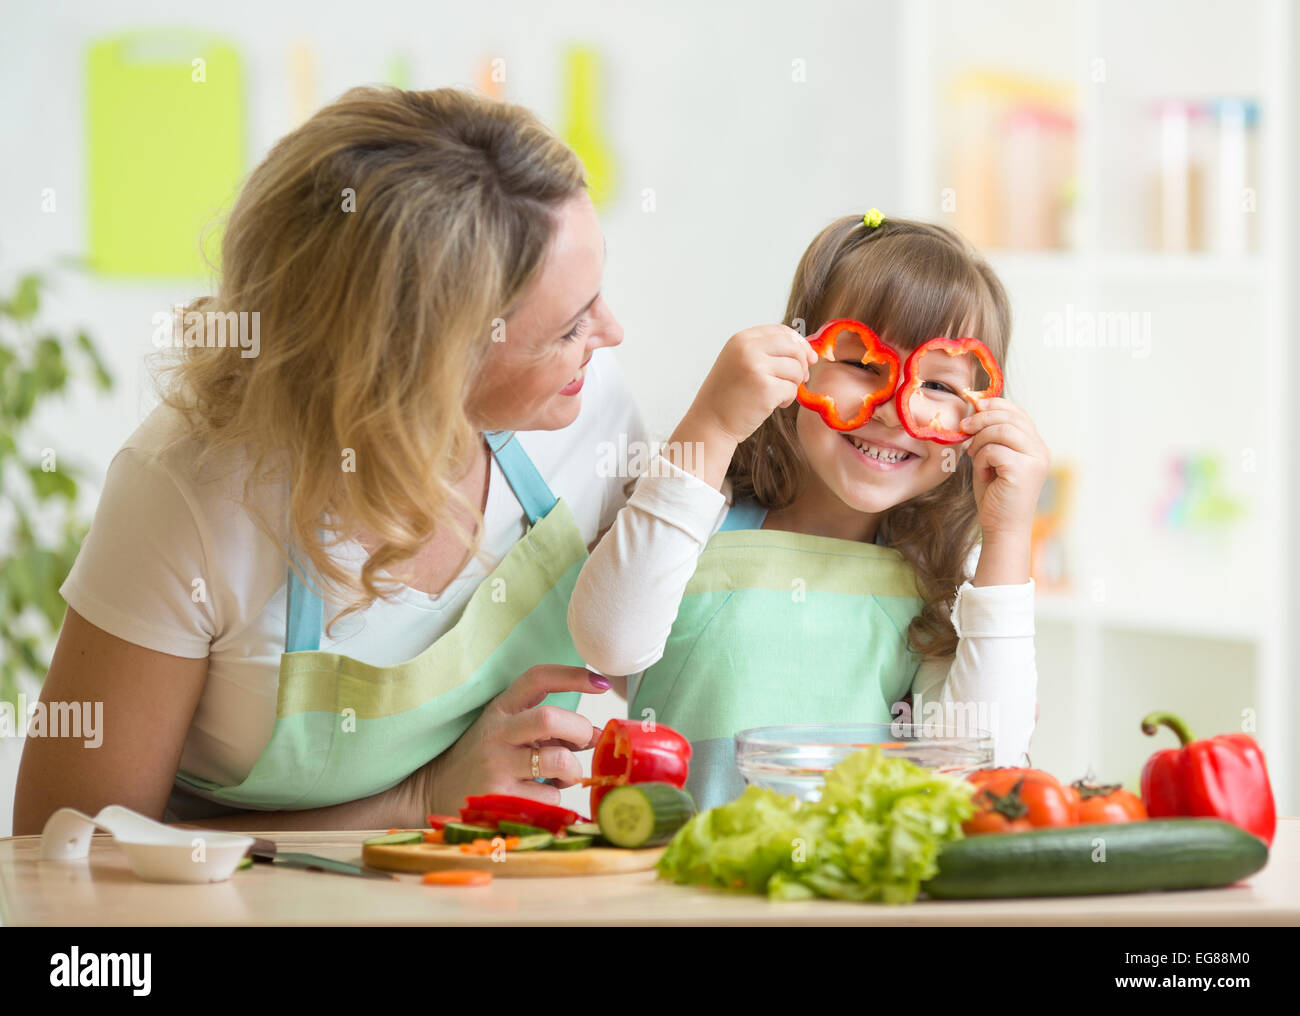 mother and her child preparing healthy food and having fun Stock Photo